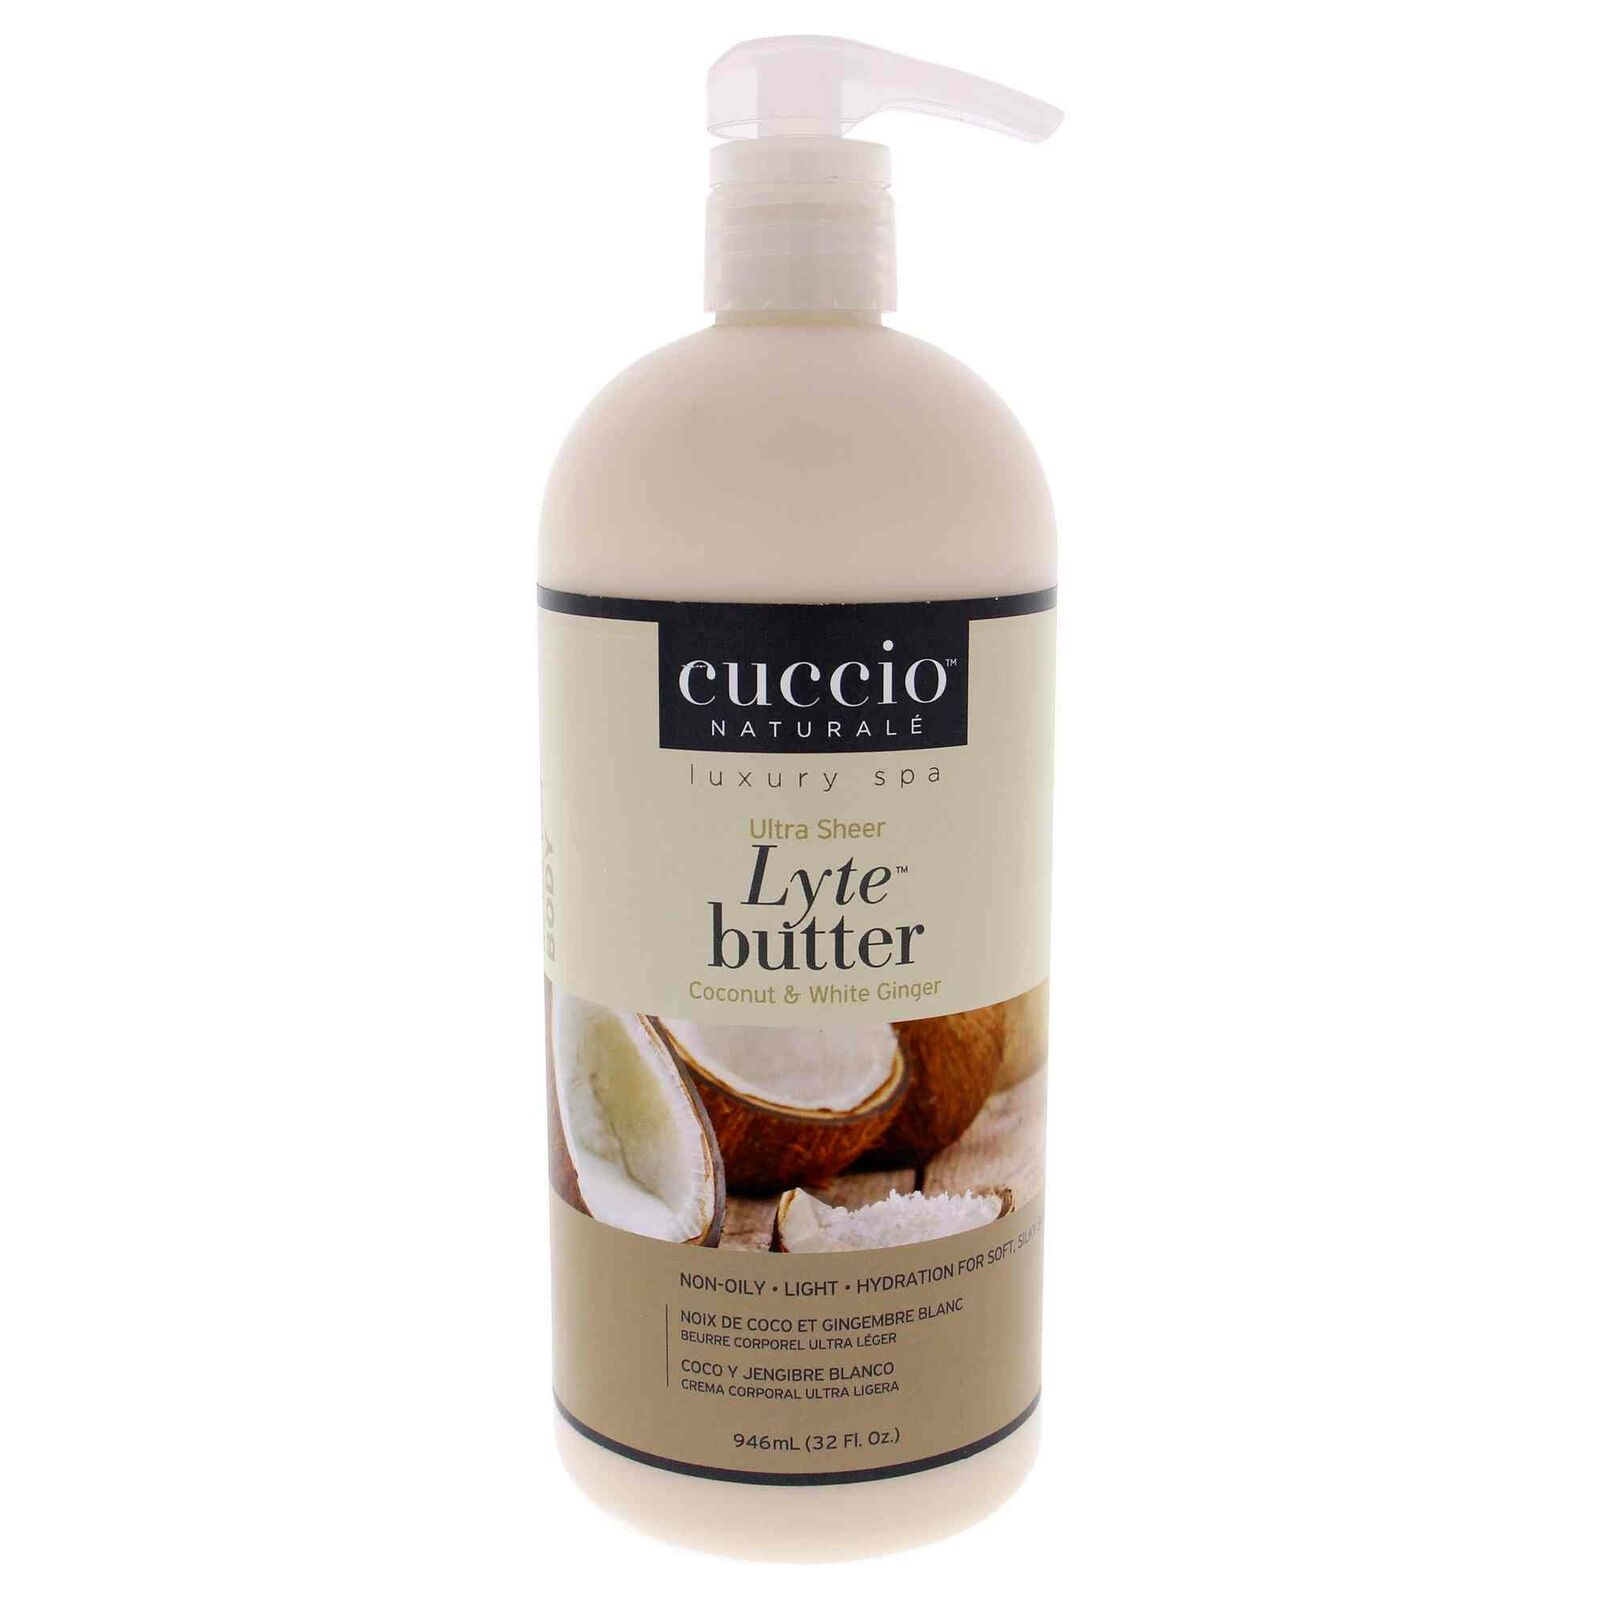 Ultra Sheer Lyte Butter - Coconut and White Ginger by Cuccio - 32 oz Body Butter